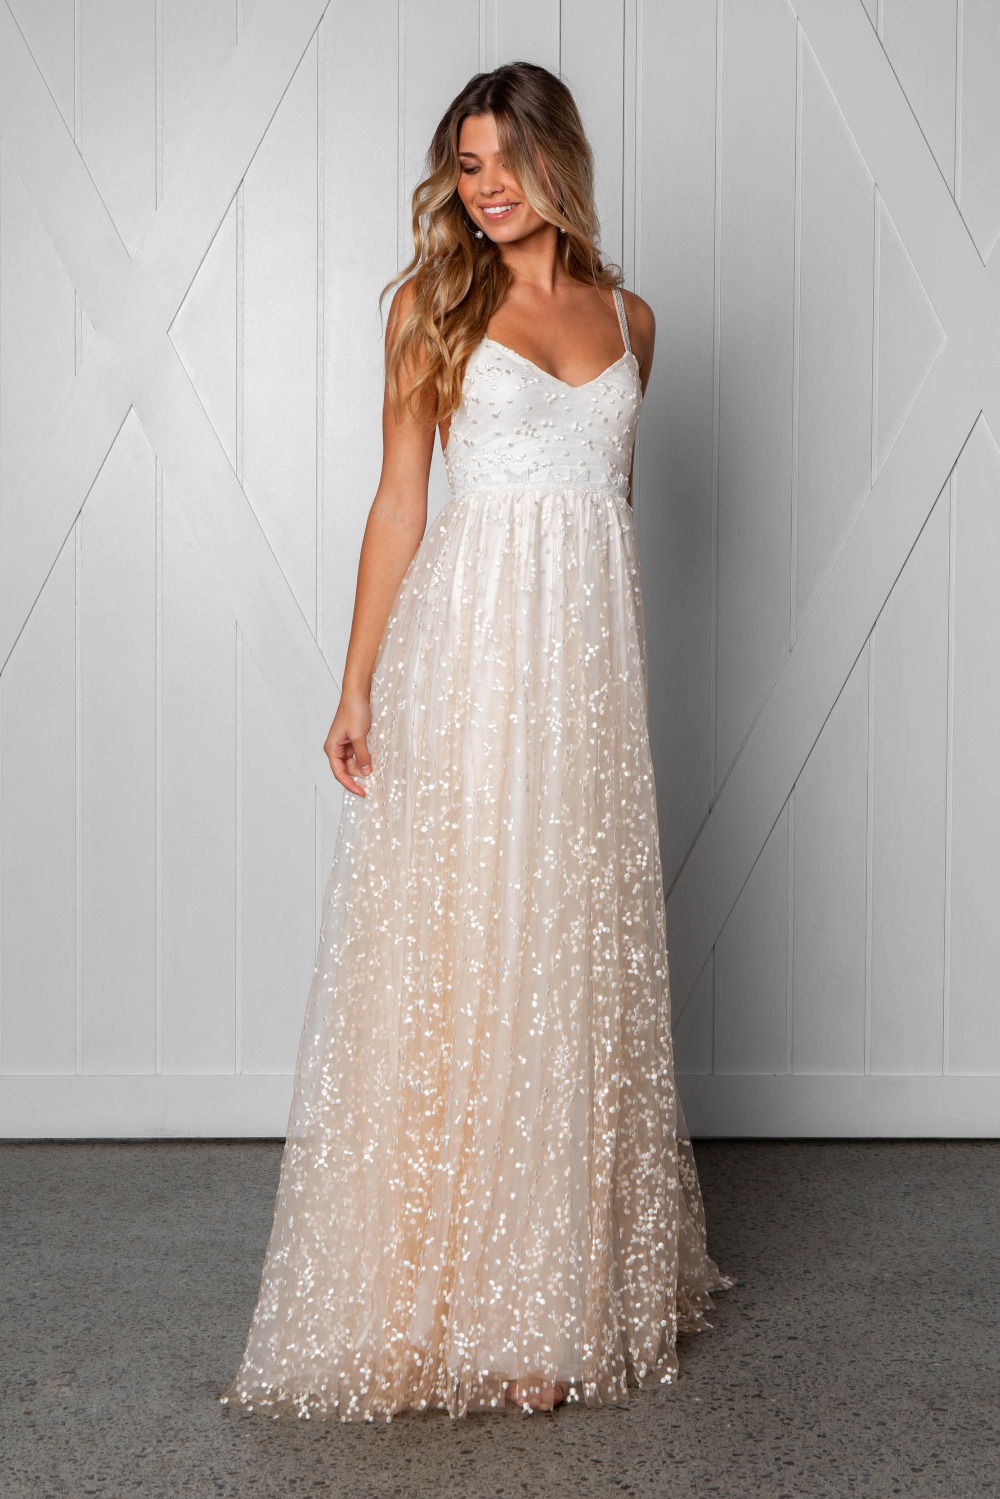 menha-wedding-dress-by-grace-loves-lace-1600-x-106